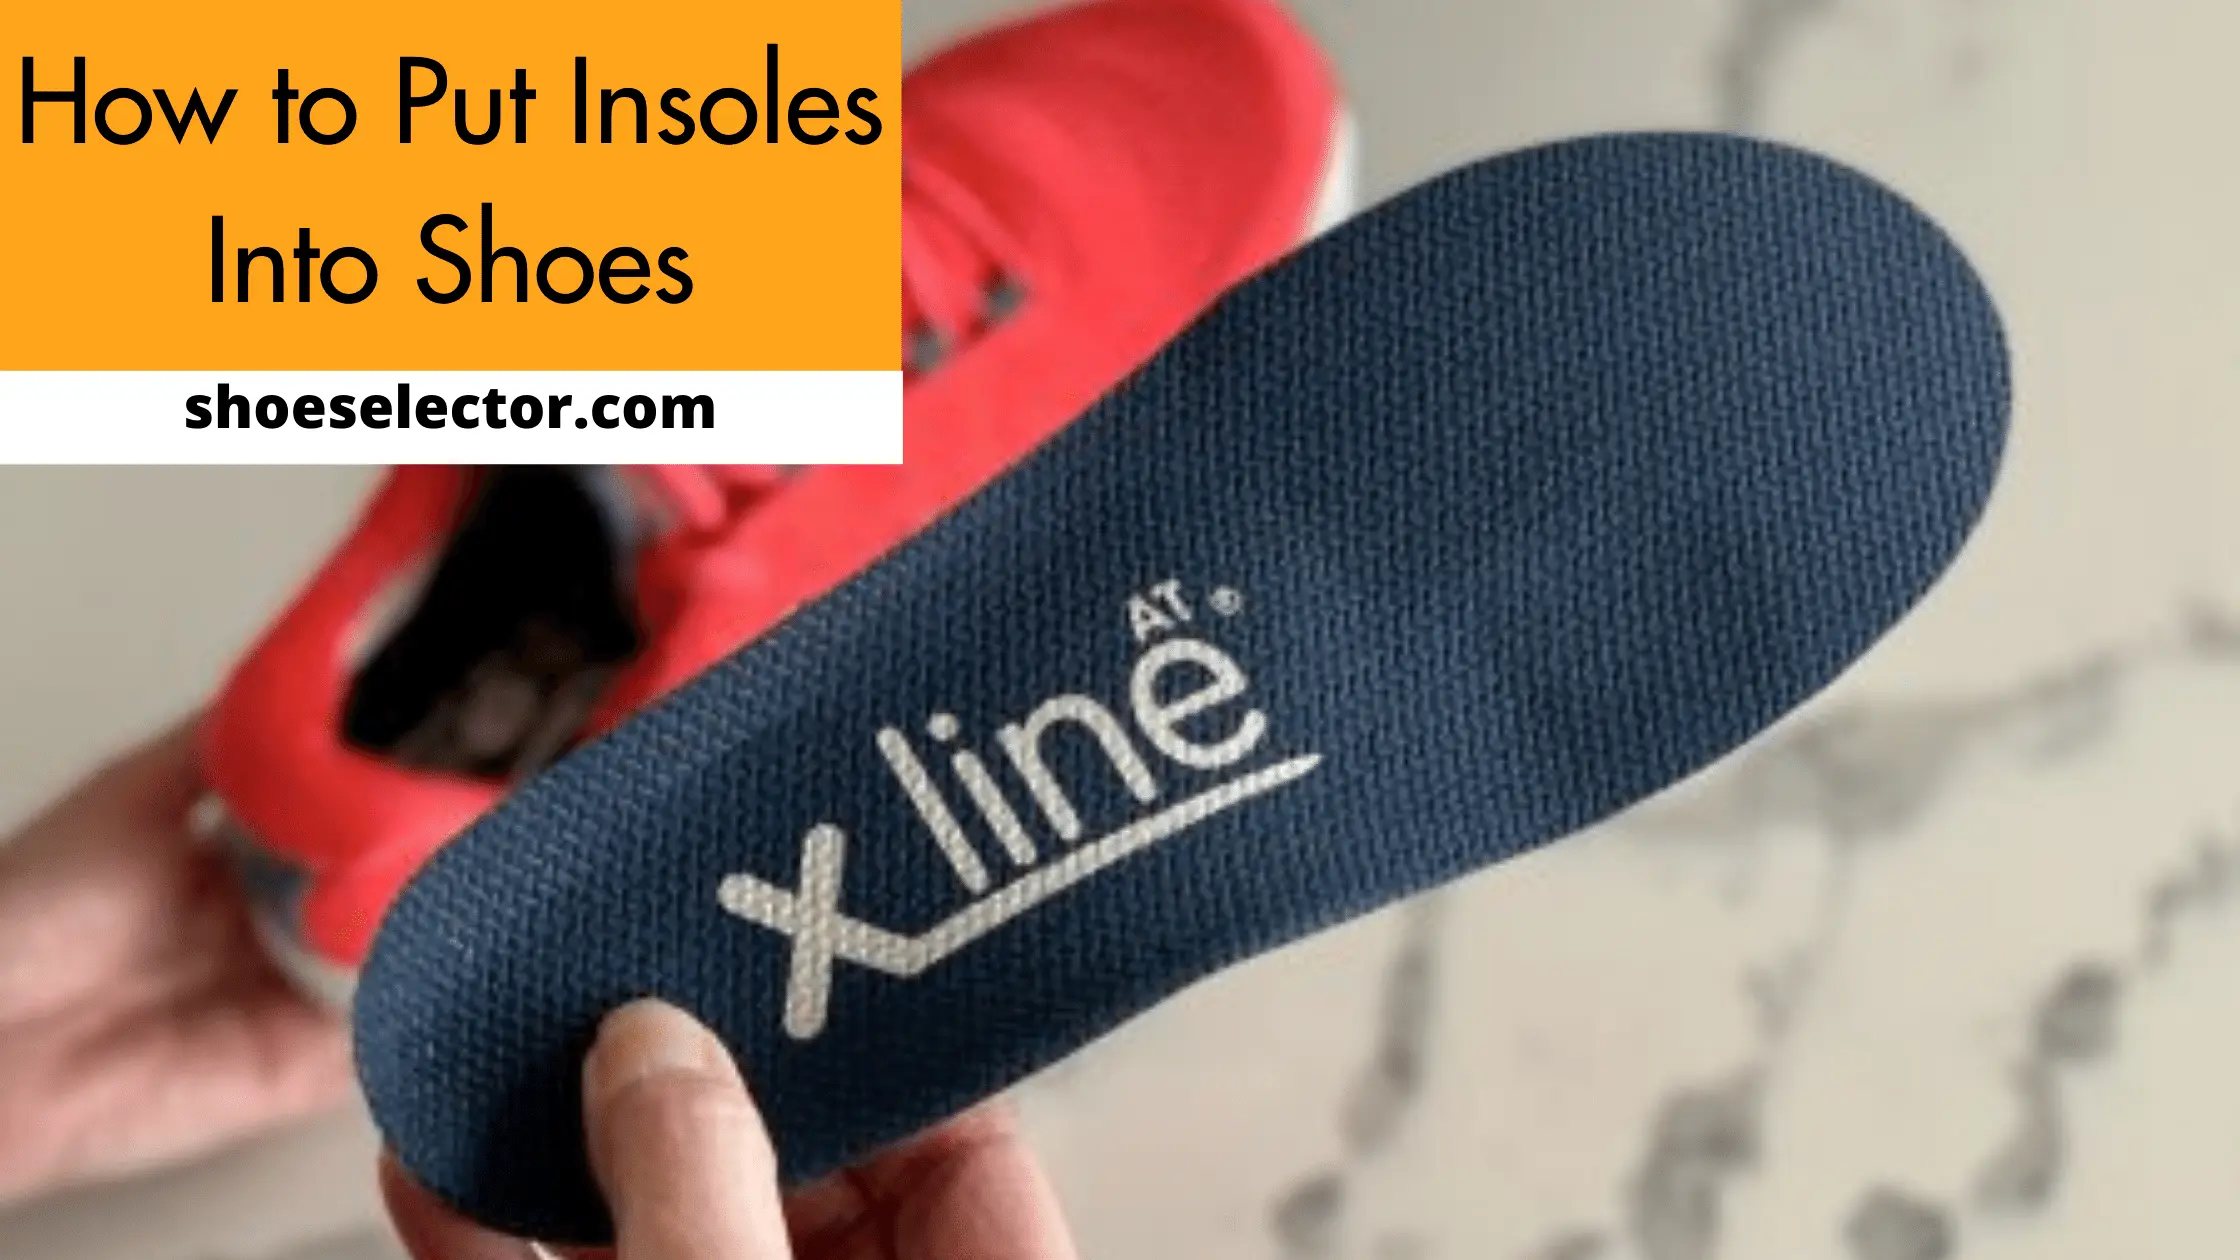 How to Put Insoles Into Shoes?